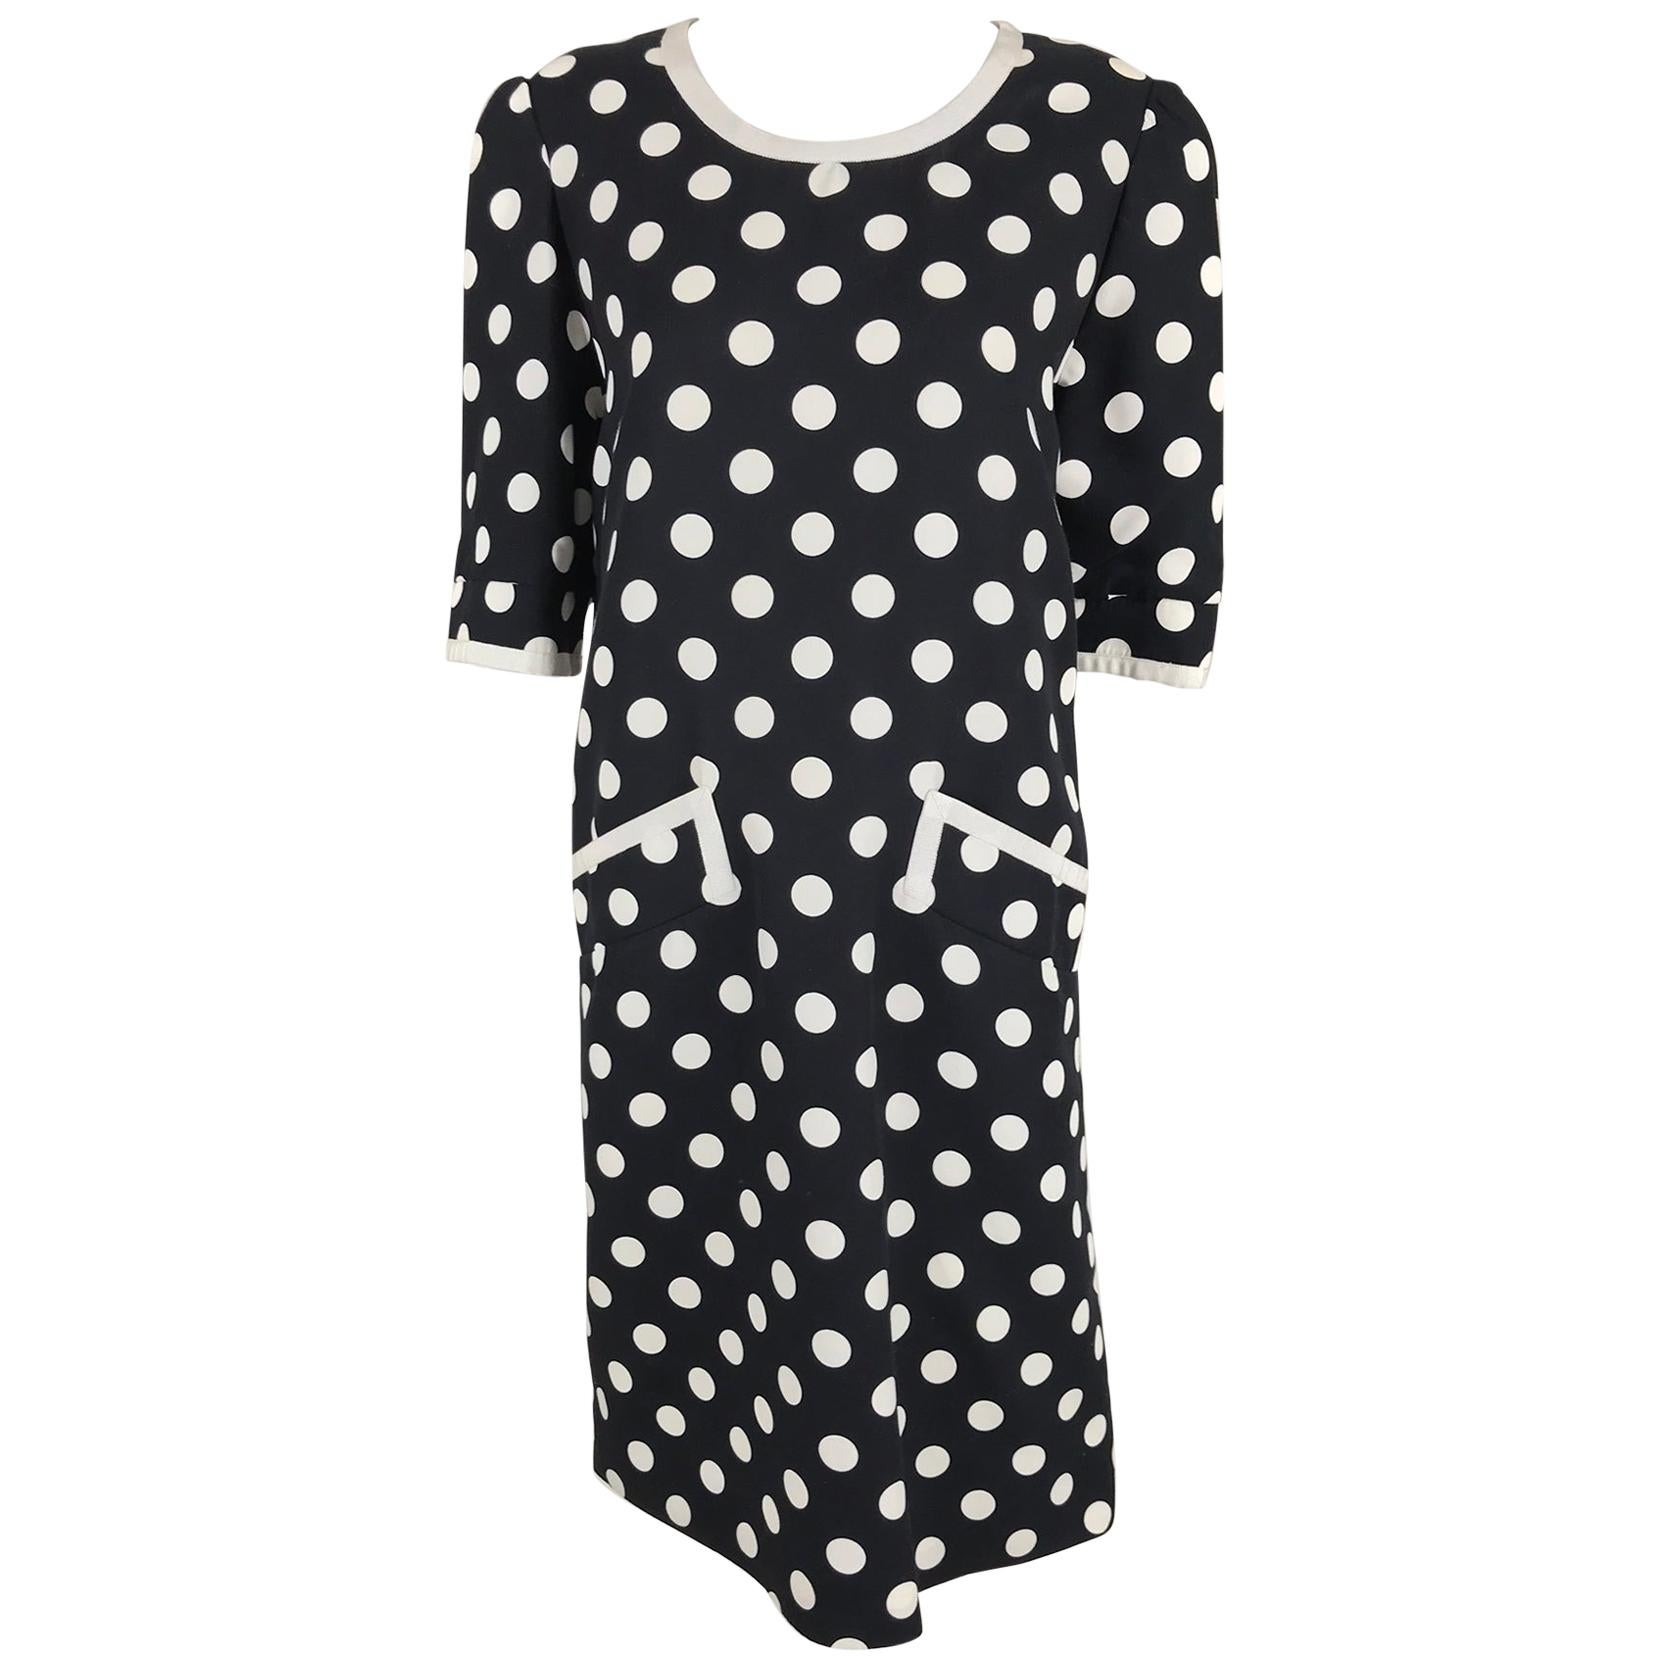 Givenchy Couture Black and White Cotton Polka Dot Day Dress 1980s